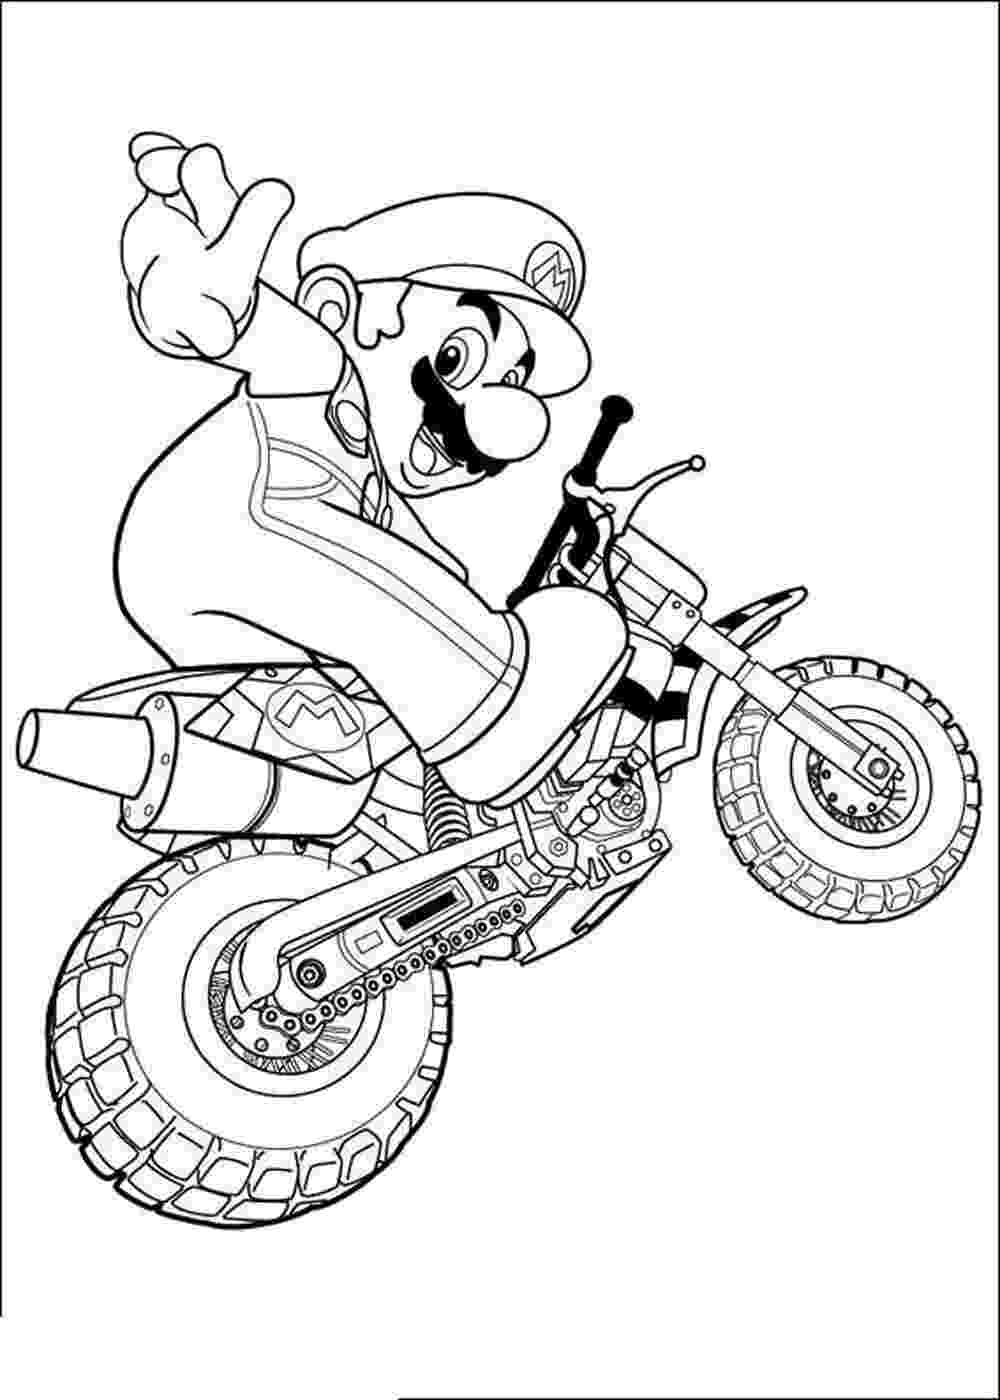 mario kart wii coloring pages 49 mario kart 7 coloring pages super mario bros bowser coloring kart wii pages mario 